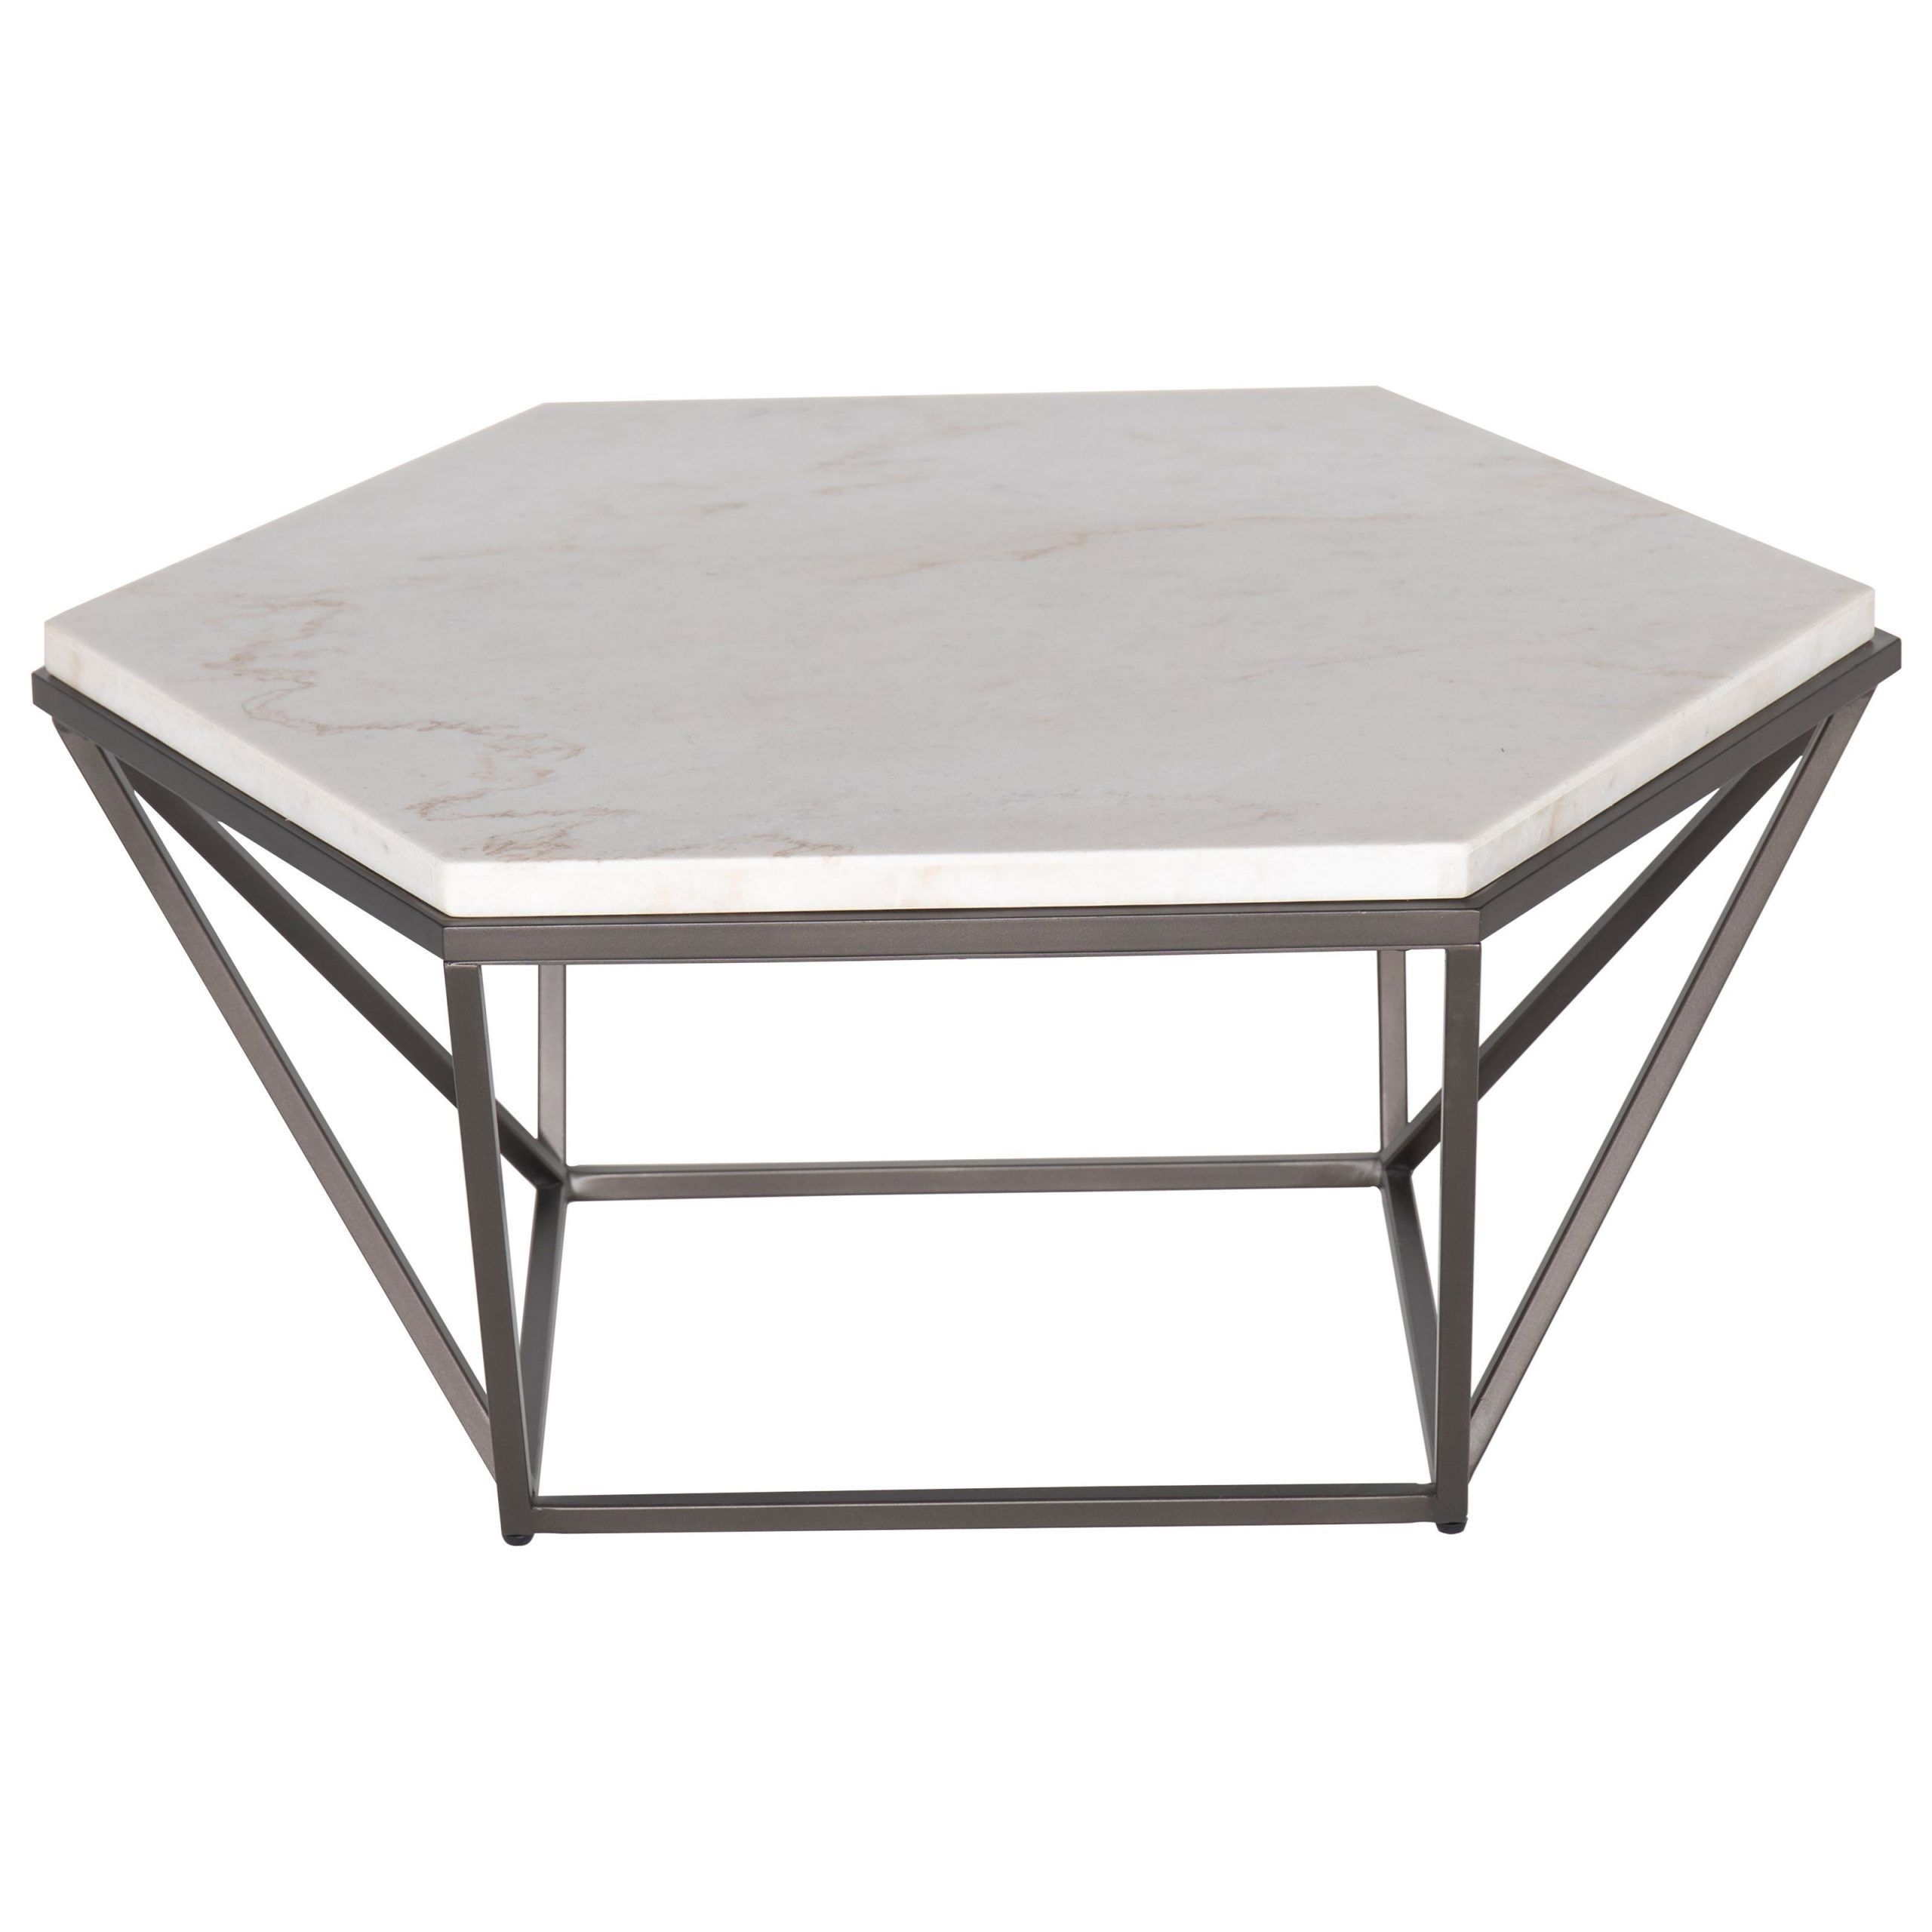 Steve Silver Corvus Contemporary Cocktail Table With Intended For White Grained Wood Hexagonal Coffee Tables (View 5 of 15)